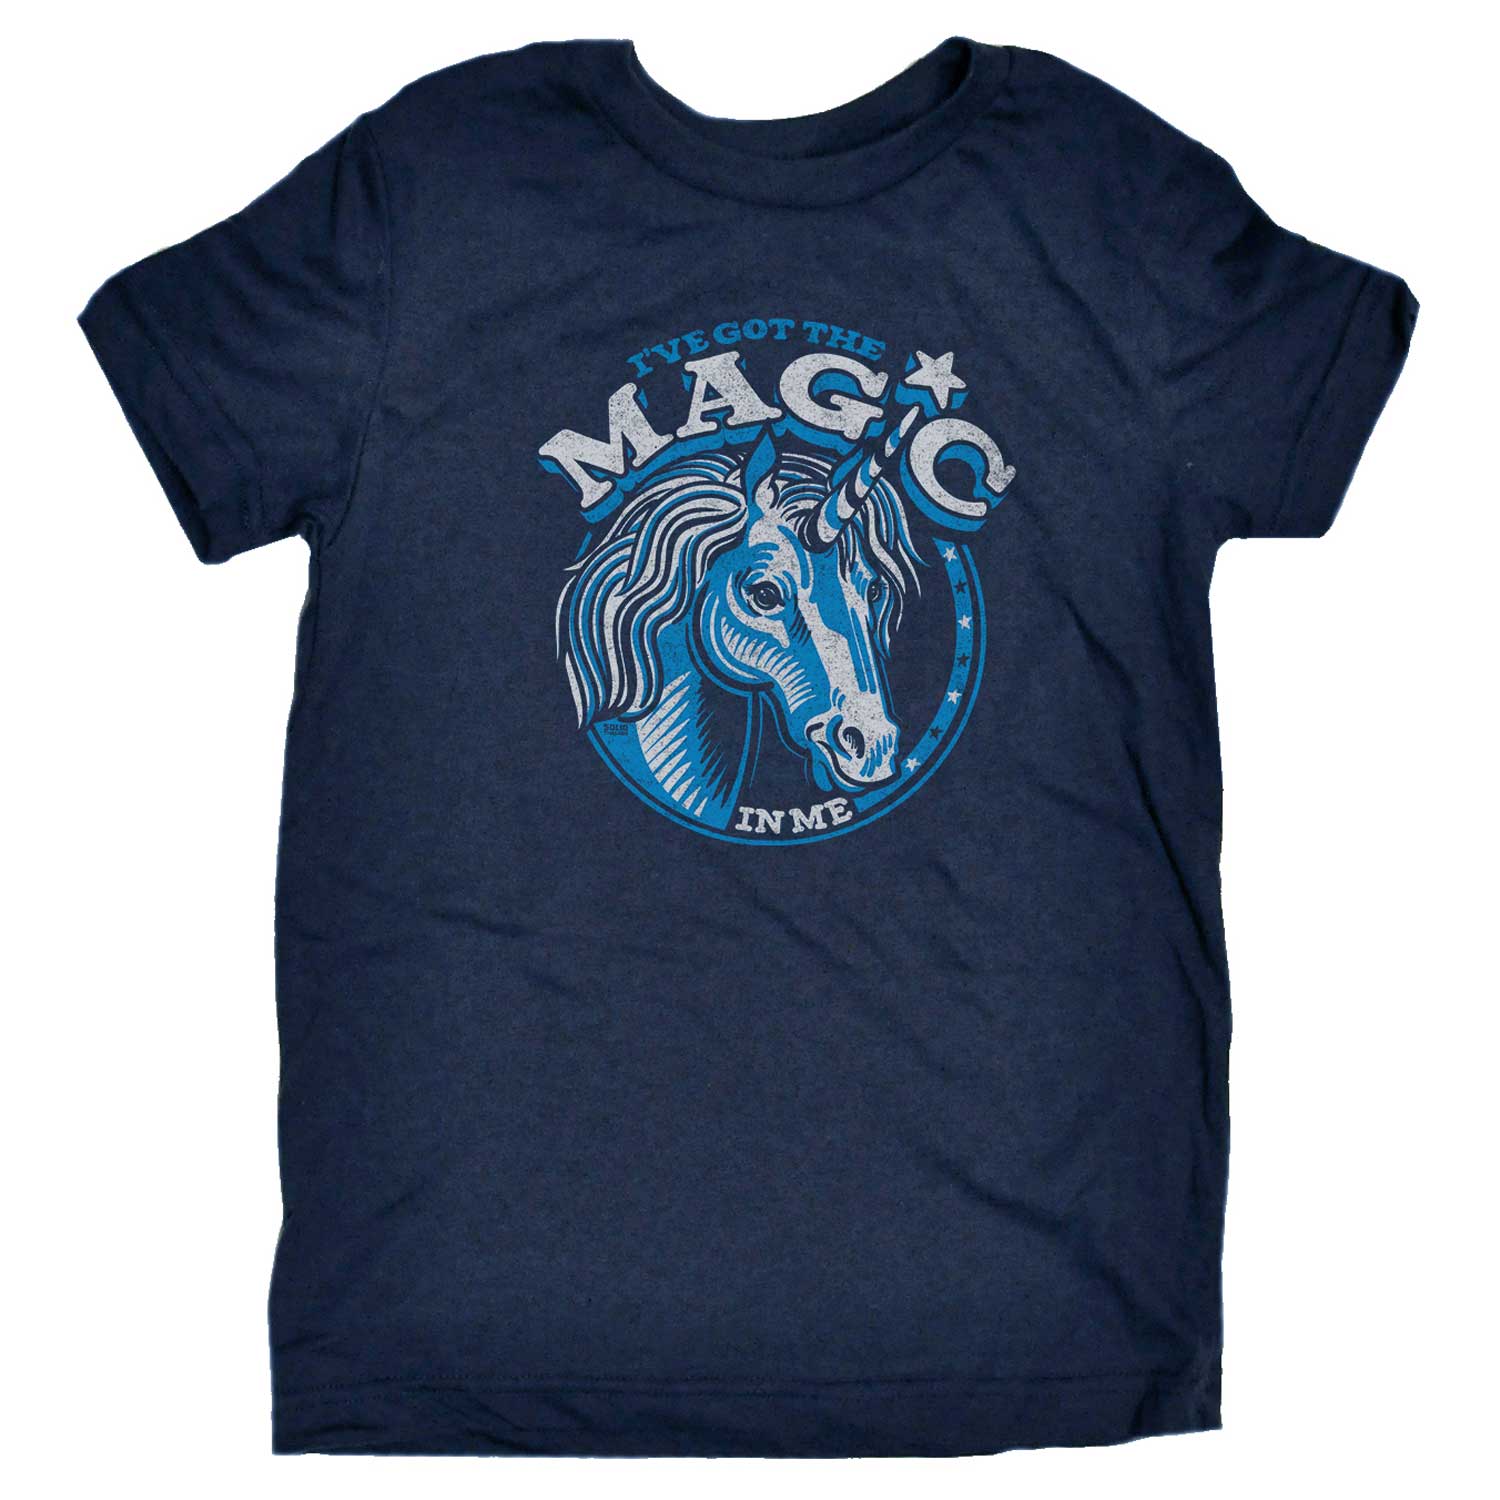 Kid's Got The Magic in Me Unicorn Retro Graphic Tee | Cute Horse T-shirt for Youth | Solid Threads